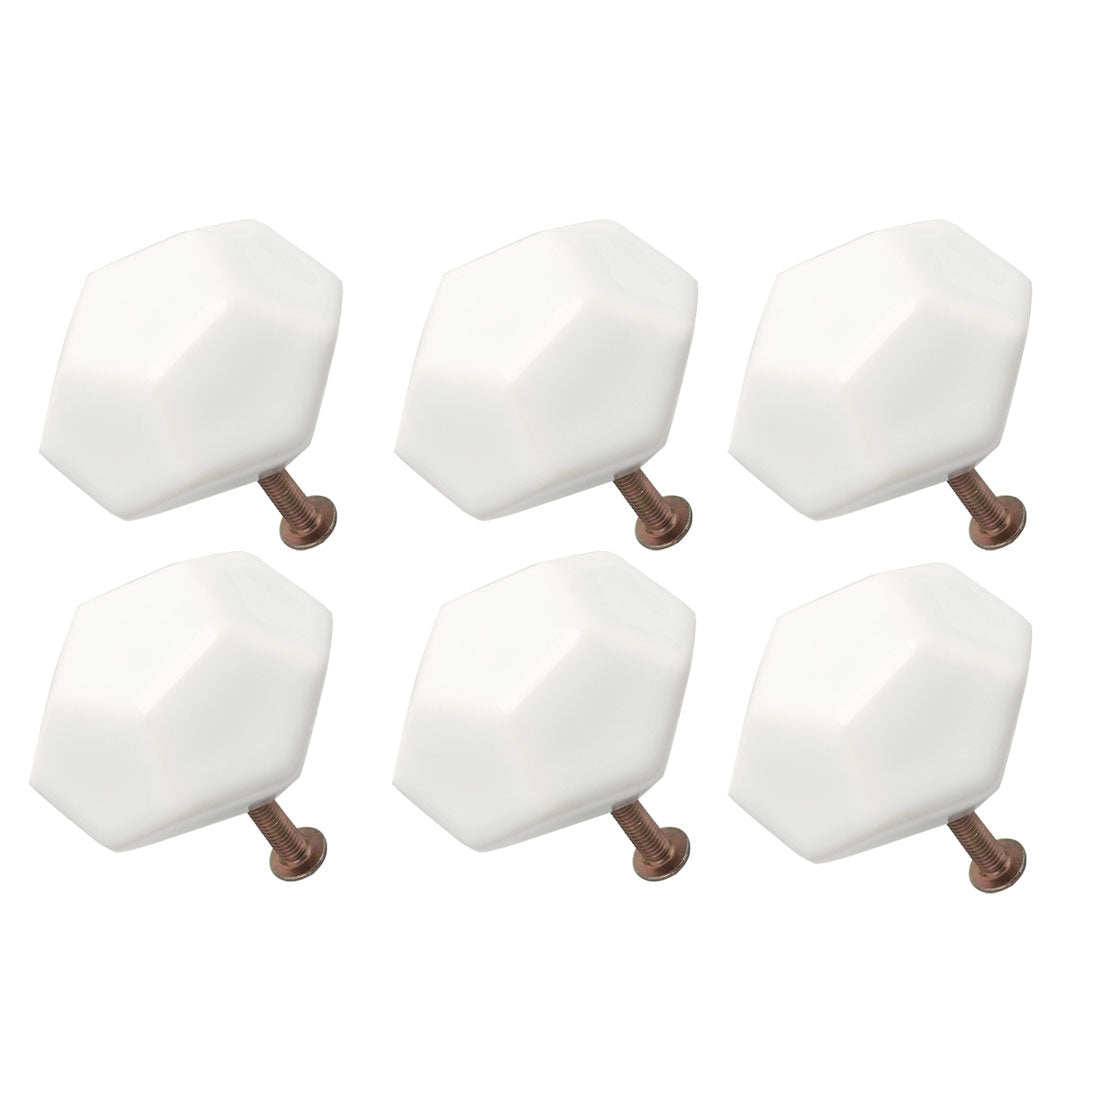 uxcell Uxcell Ceramic Vintage Knob Geometry Drawer Pull Handle Cupboard Wardrobe 6pcs White